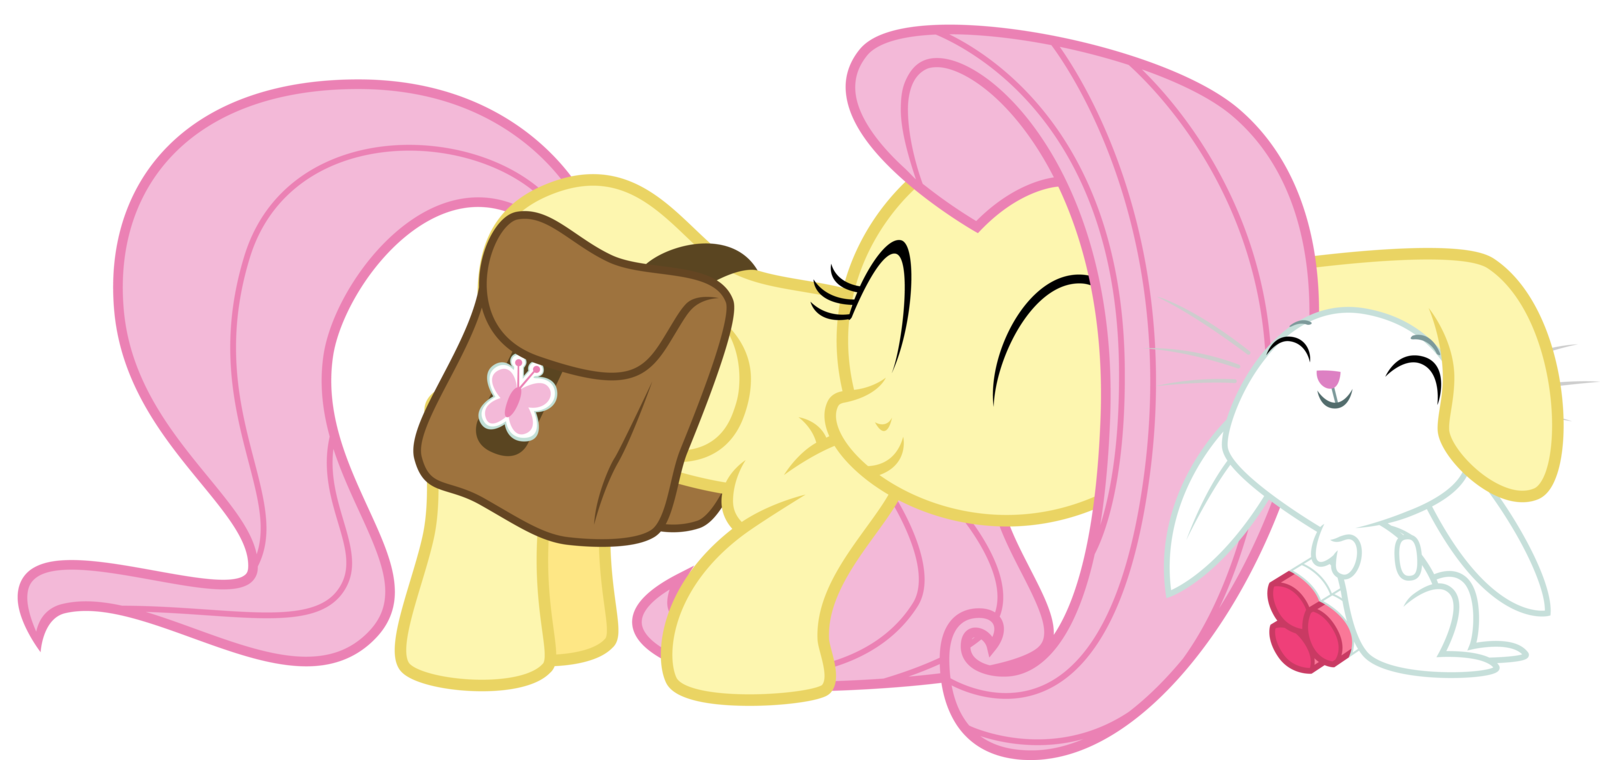 fluttershy_and_angel_snuggle_by_thatguy1